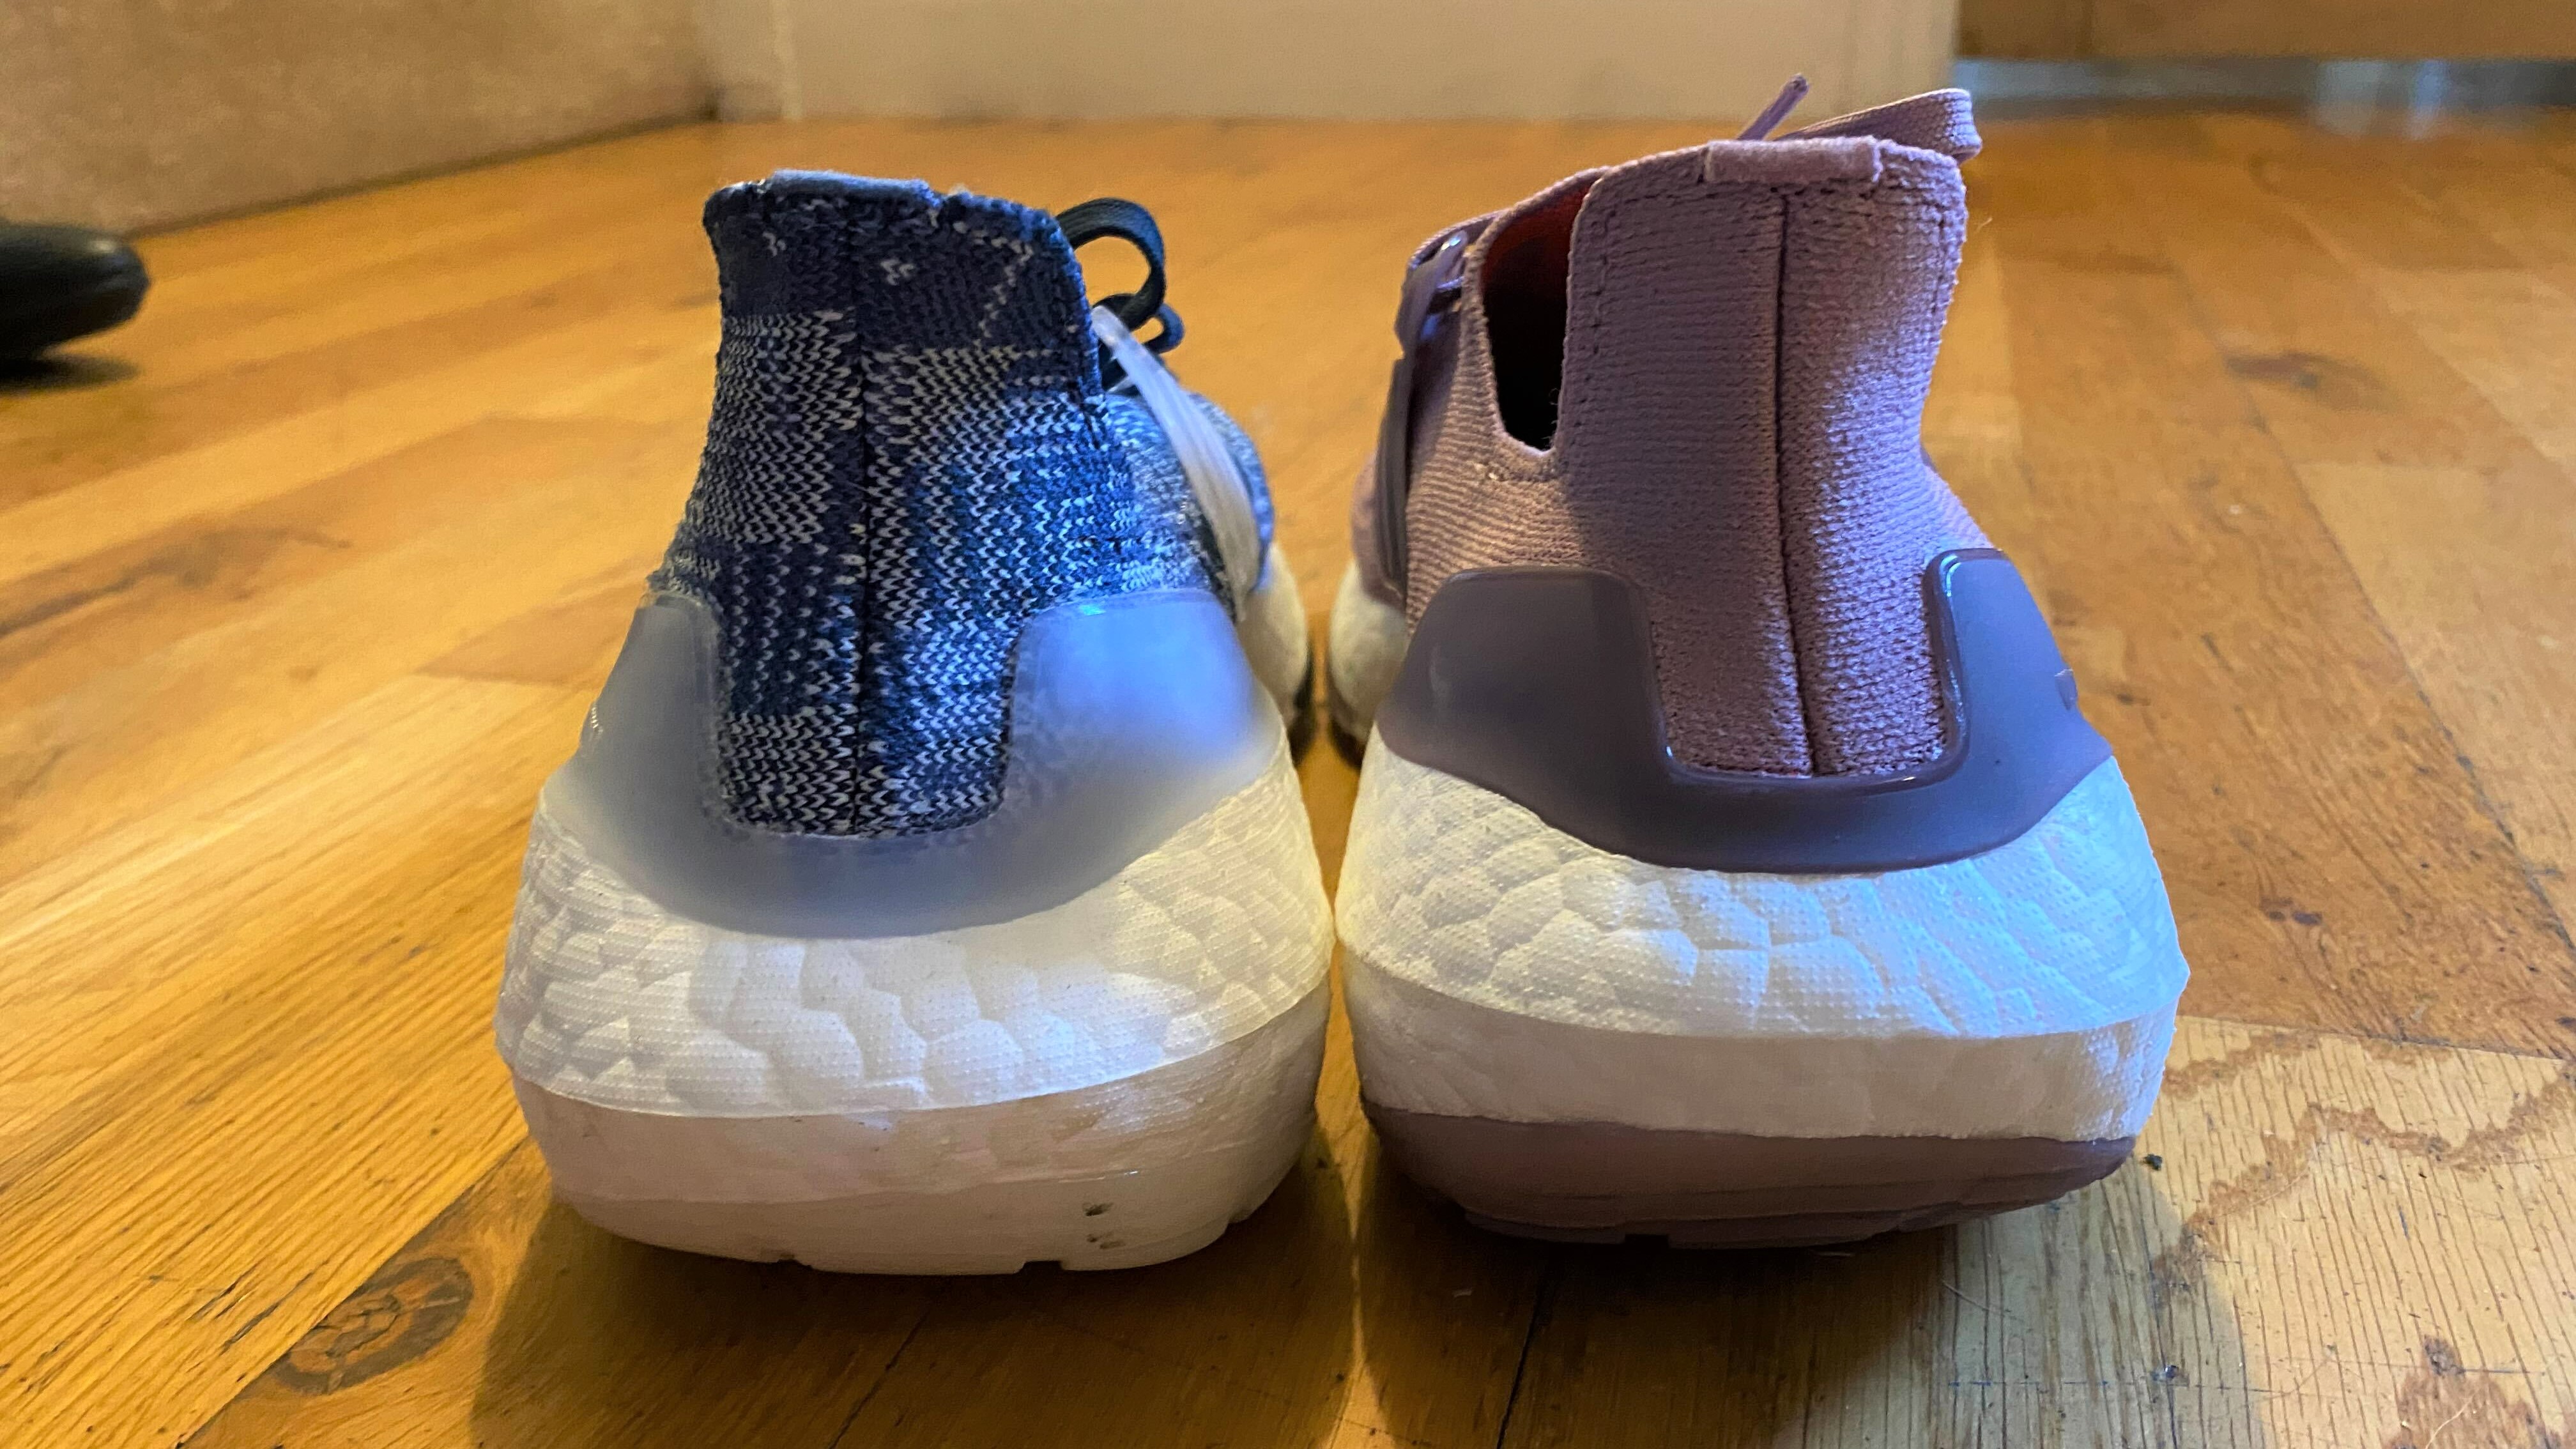 A photo of the midsole of the Ultraboost 21 vs Ultraboost 22